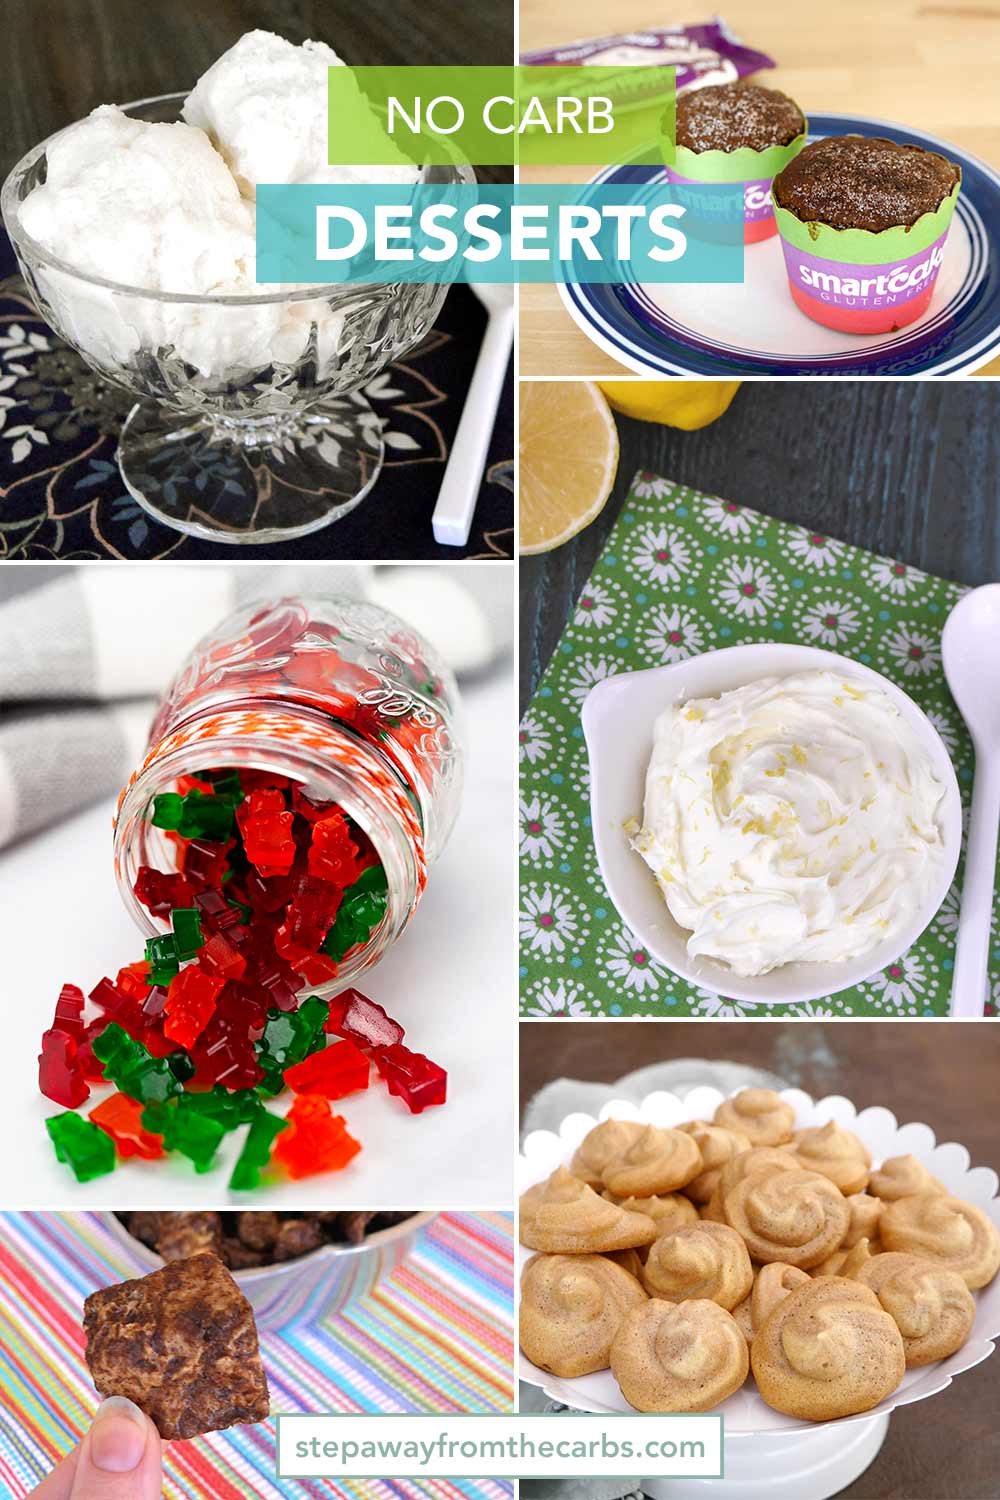 No Carb Desserts - sweet treats without the sugar or carbohydrates!